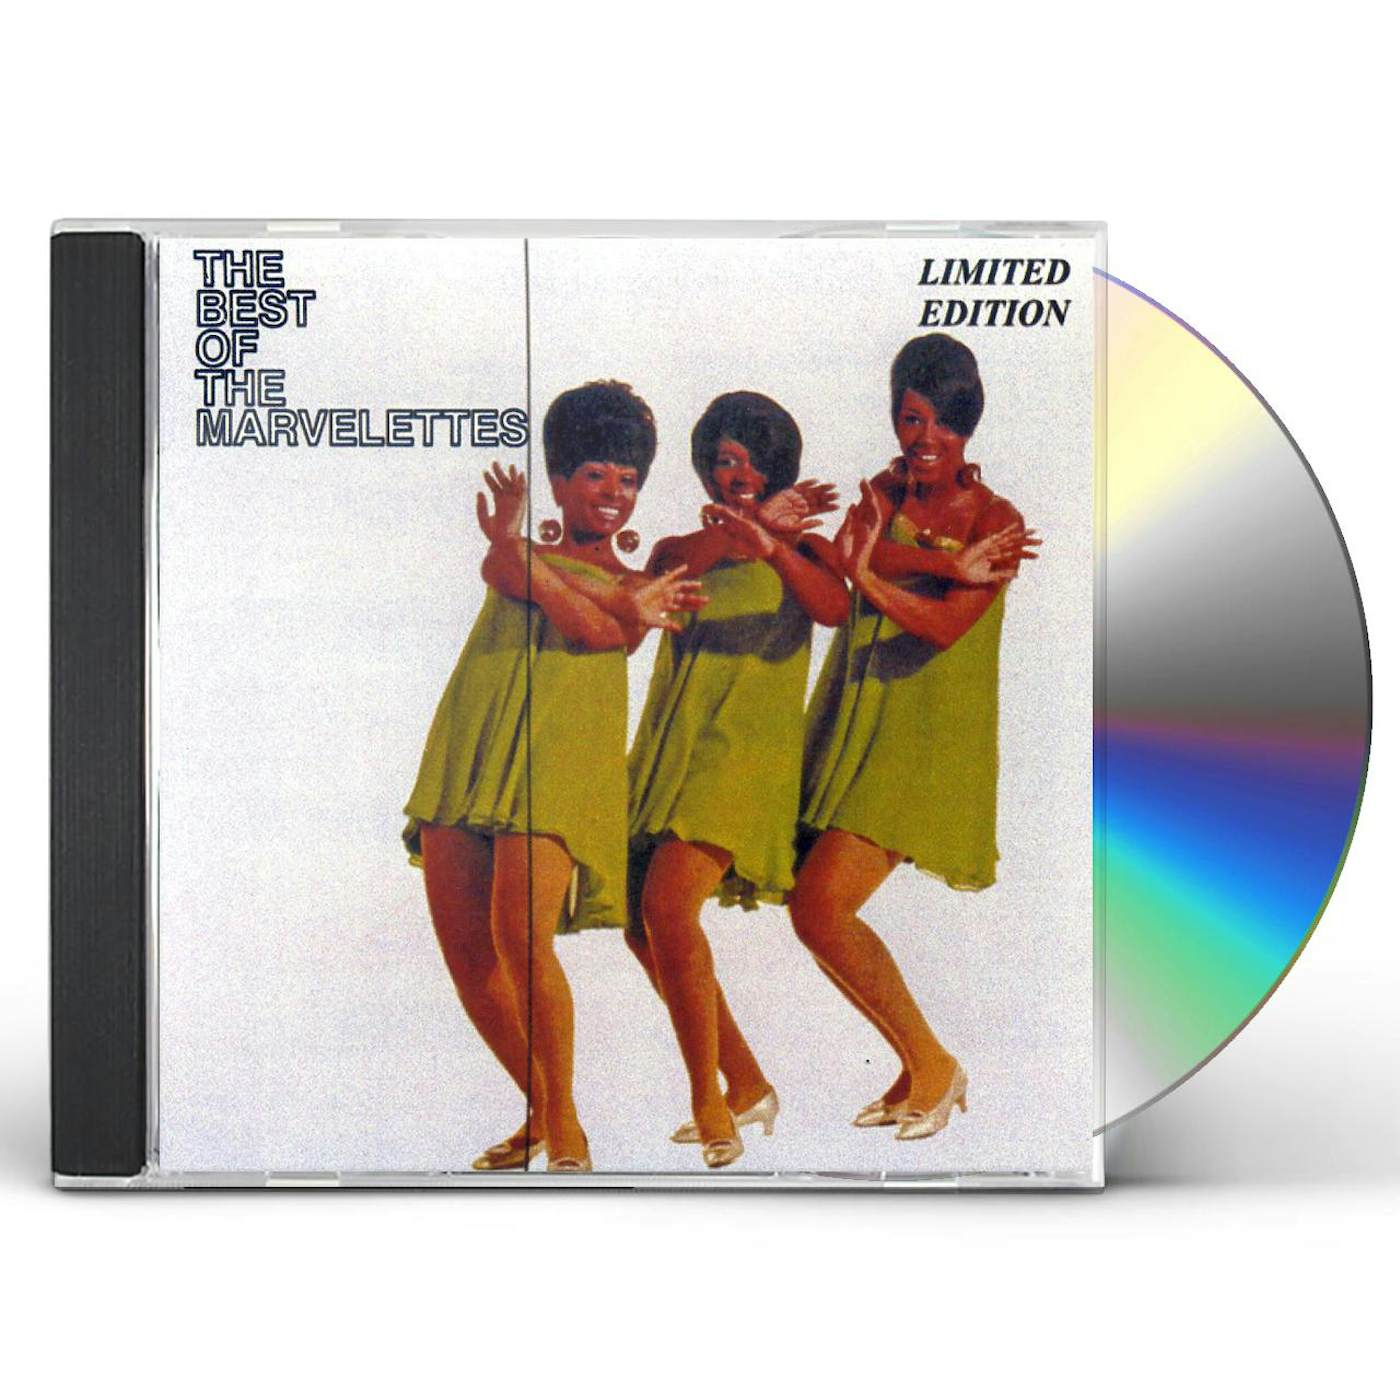 The Marvelettes BEST OF WITH RARITIES CD